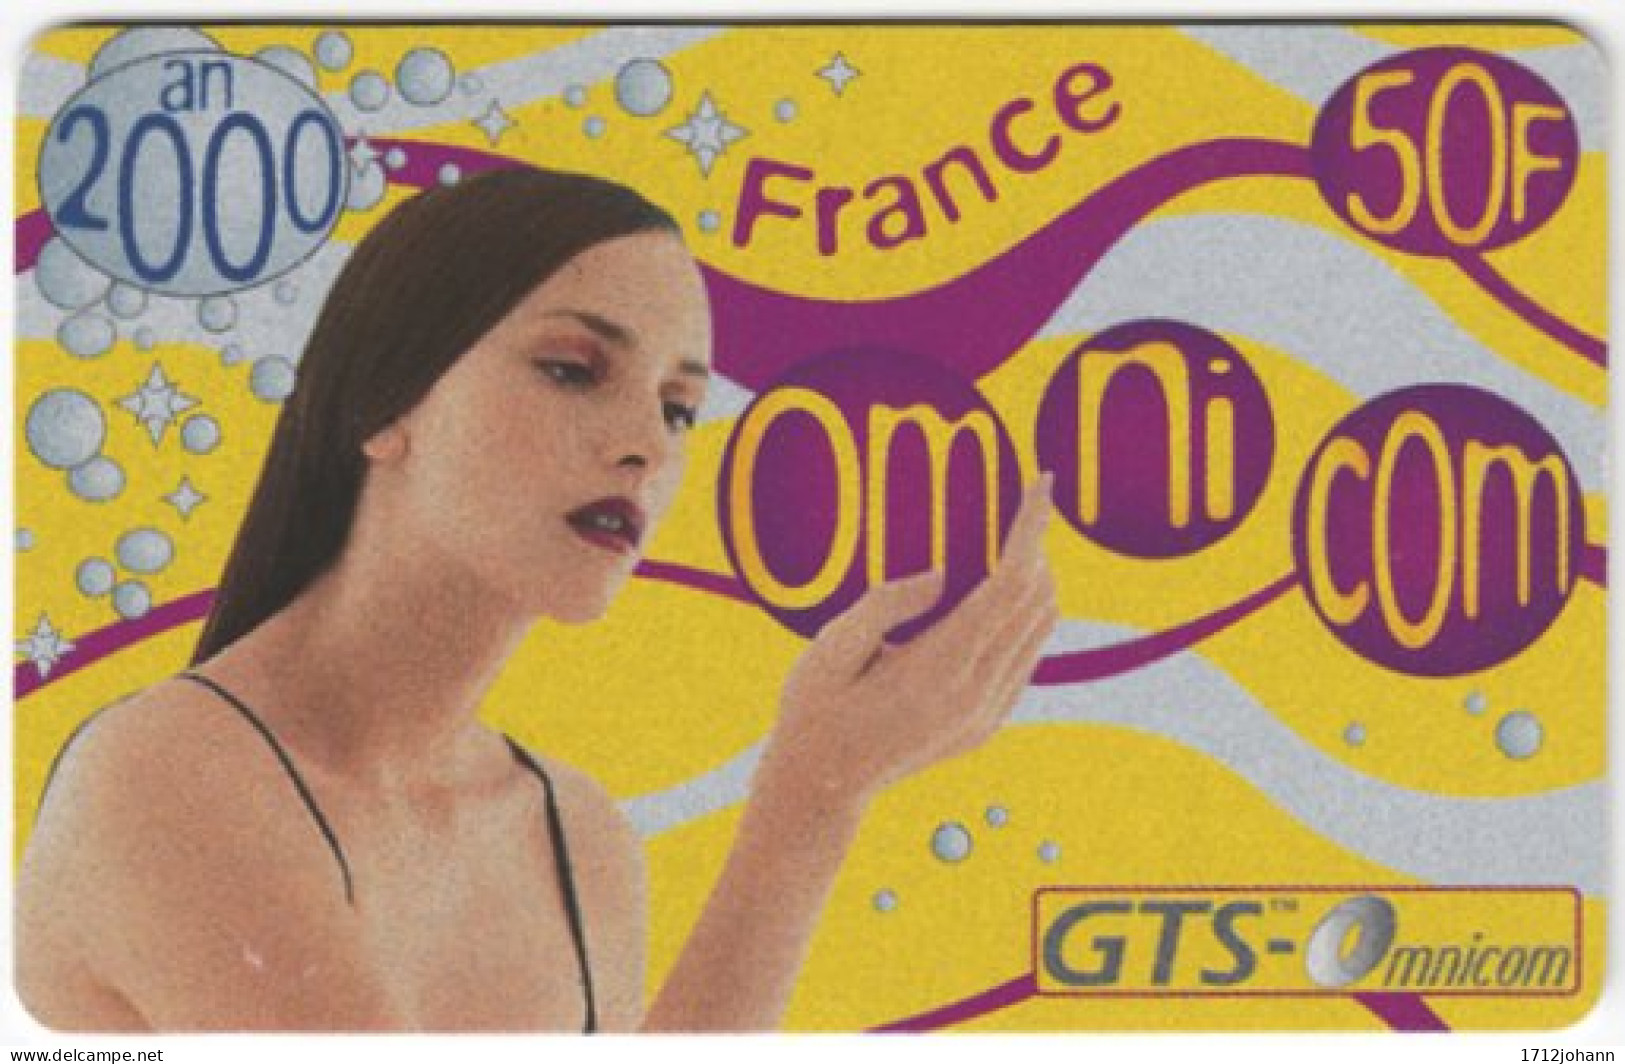 FRANCE C-499 Prepaid GTS - People, Woman - Used - Cellphone Cards (refills)